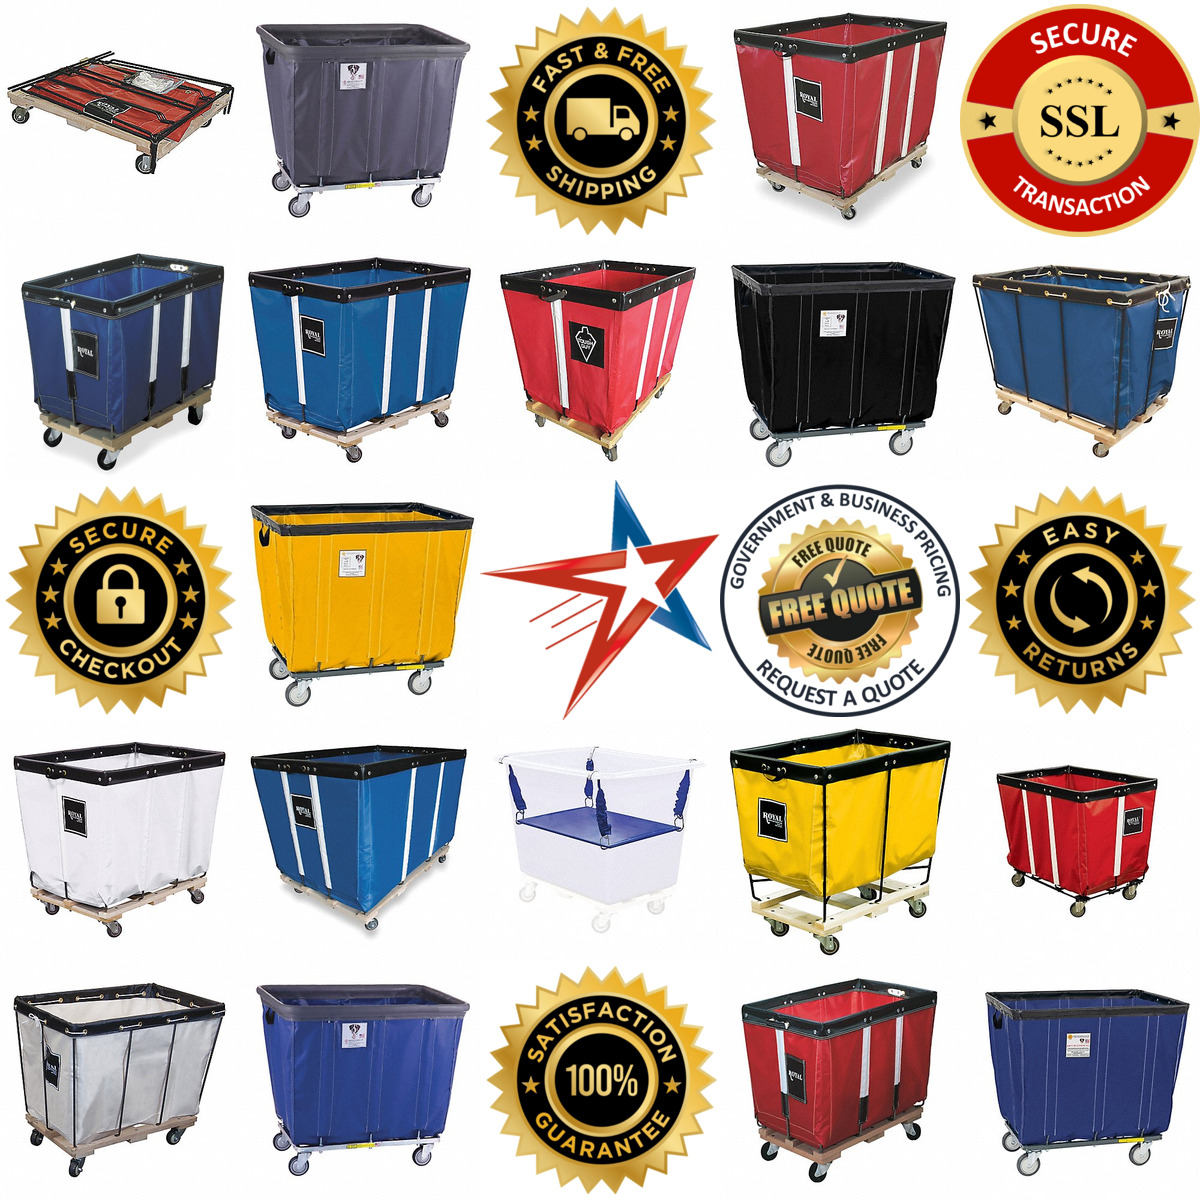 A selection of Basket Trucks products on GoVets